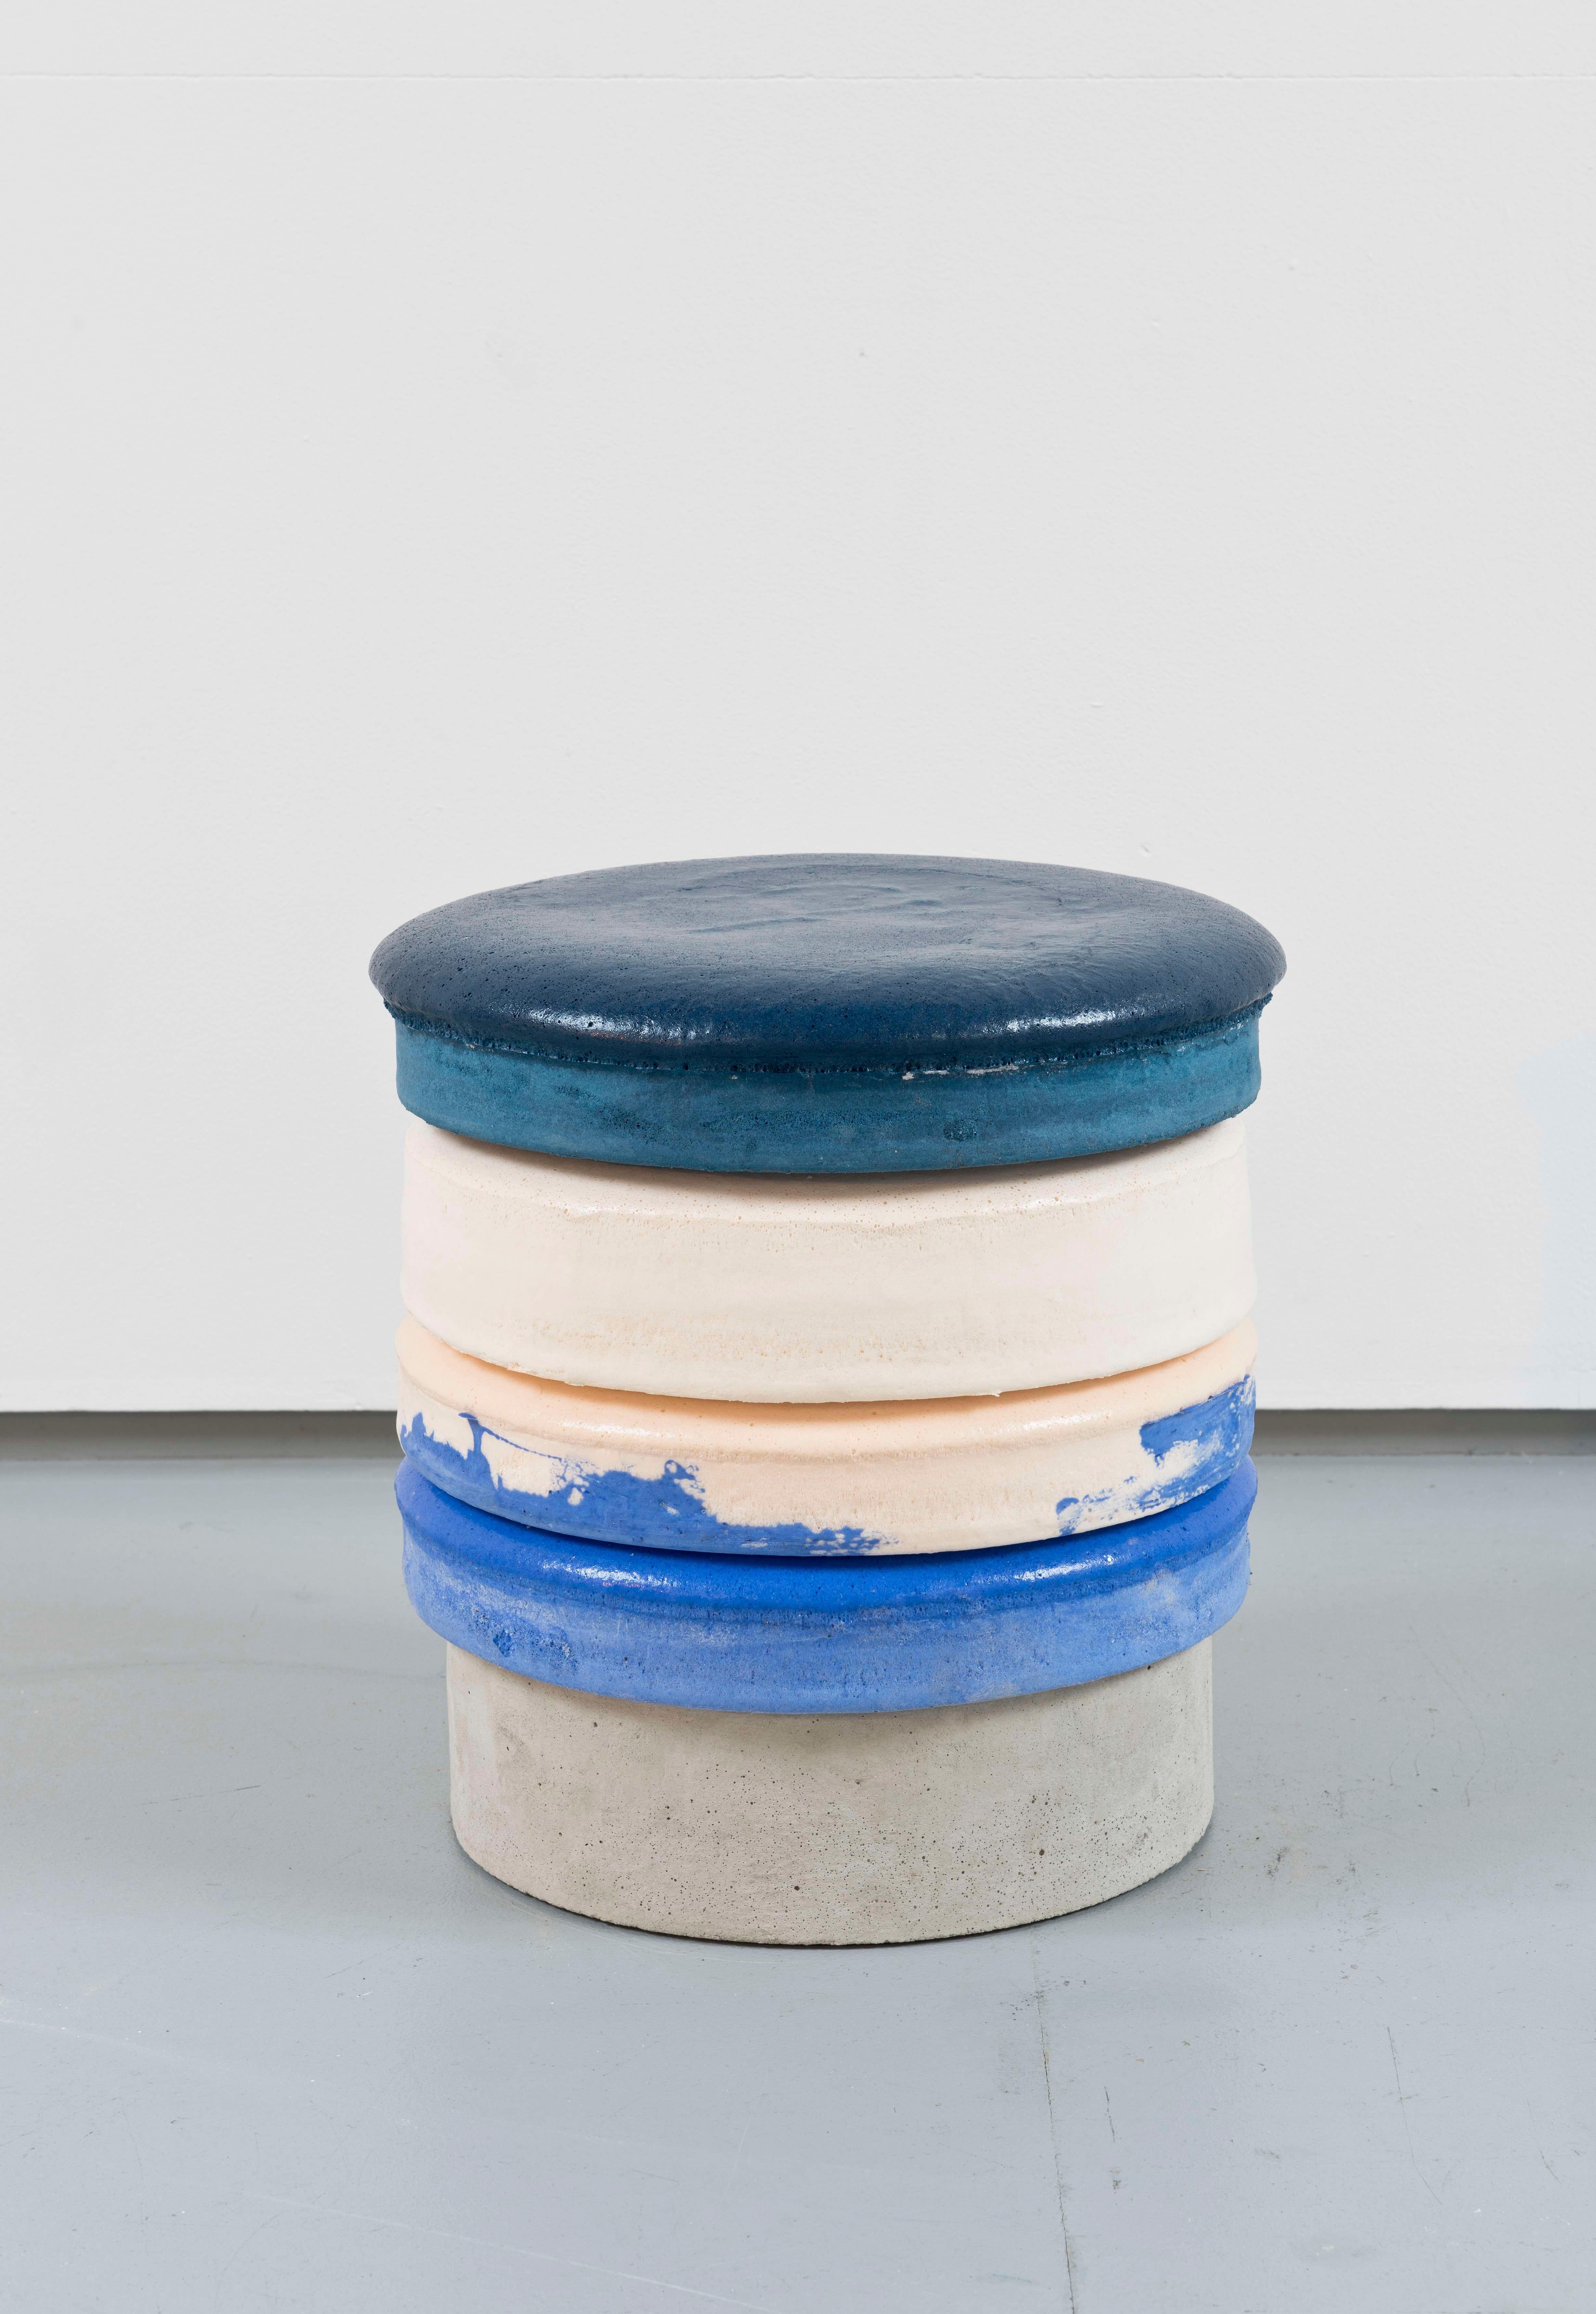 Cristian Andersen
Macaron stool, 2020
Each unique, signed by the artist
Polyurethane, pigments, concrete and cork
Measures: H 39 cm (15 3/8 in), Ø 37 cm

Cristian Andersen (*1974) has been working at the interface between design and sculpture